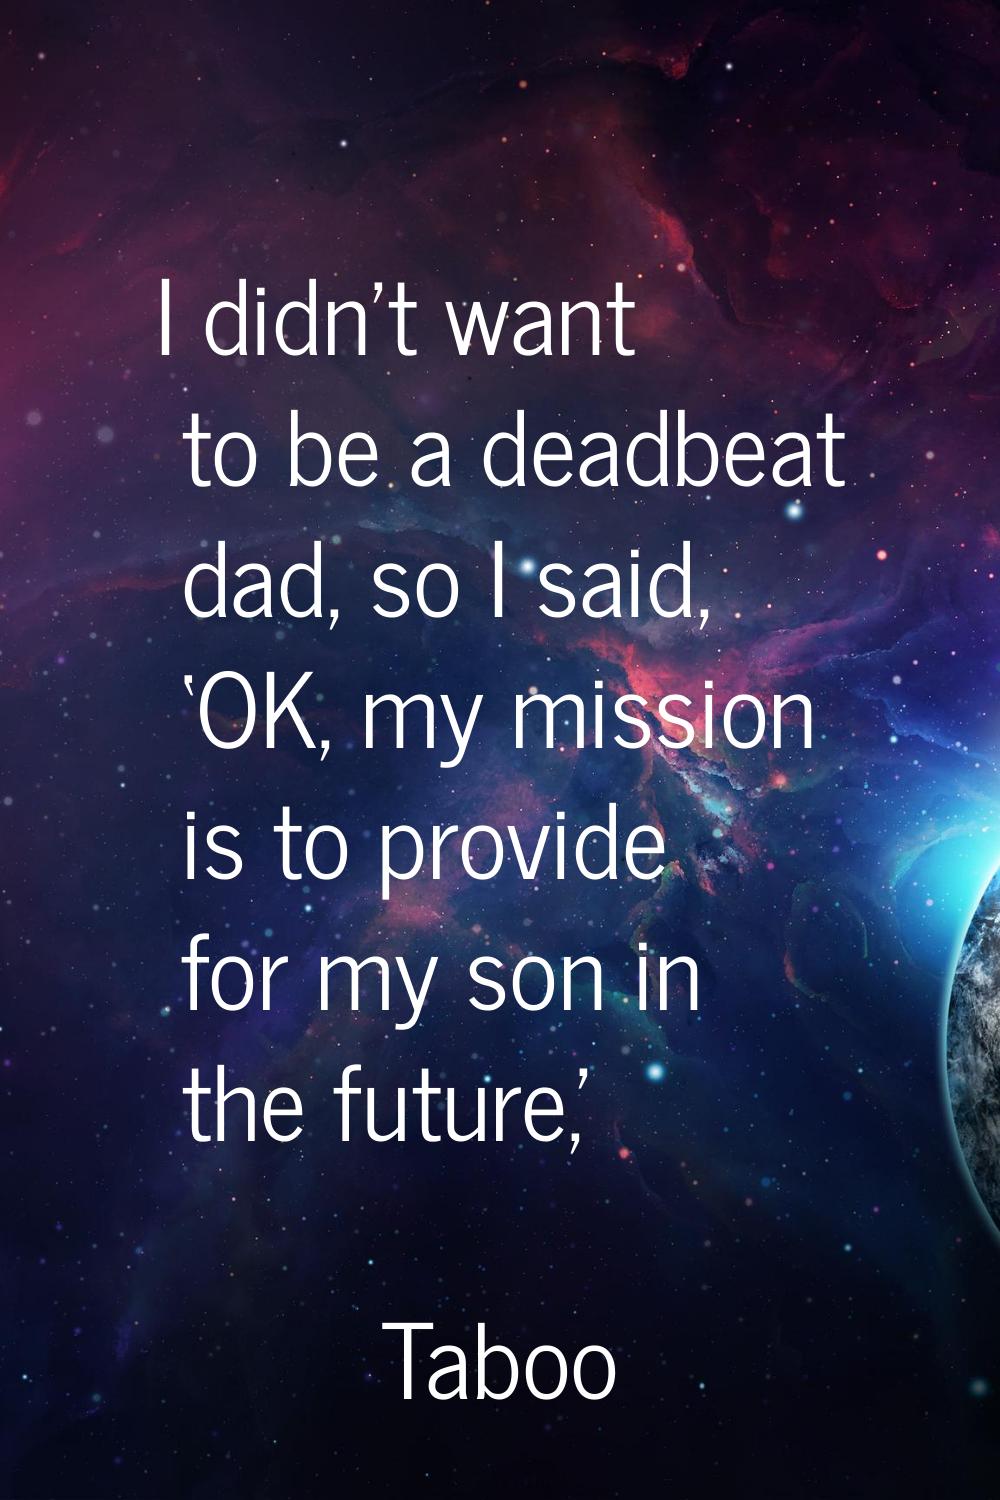 I didn't want to be a deadbeat dad, so I said, ‘OK, my mission is to provide for my son in the futu